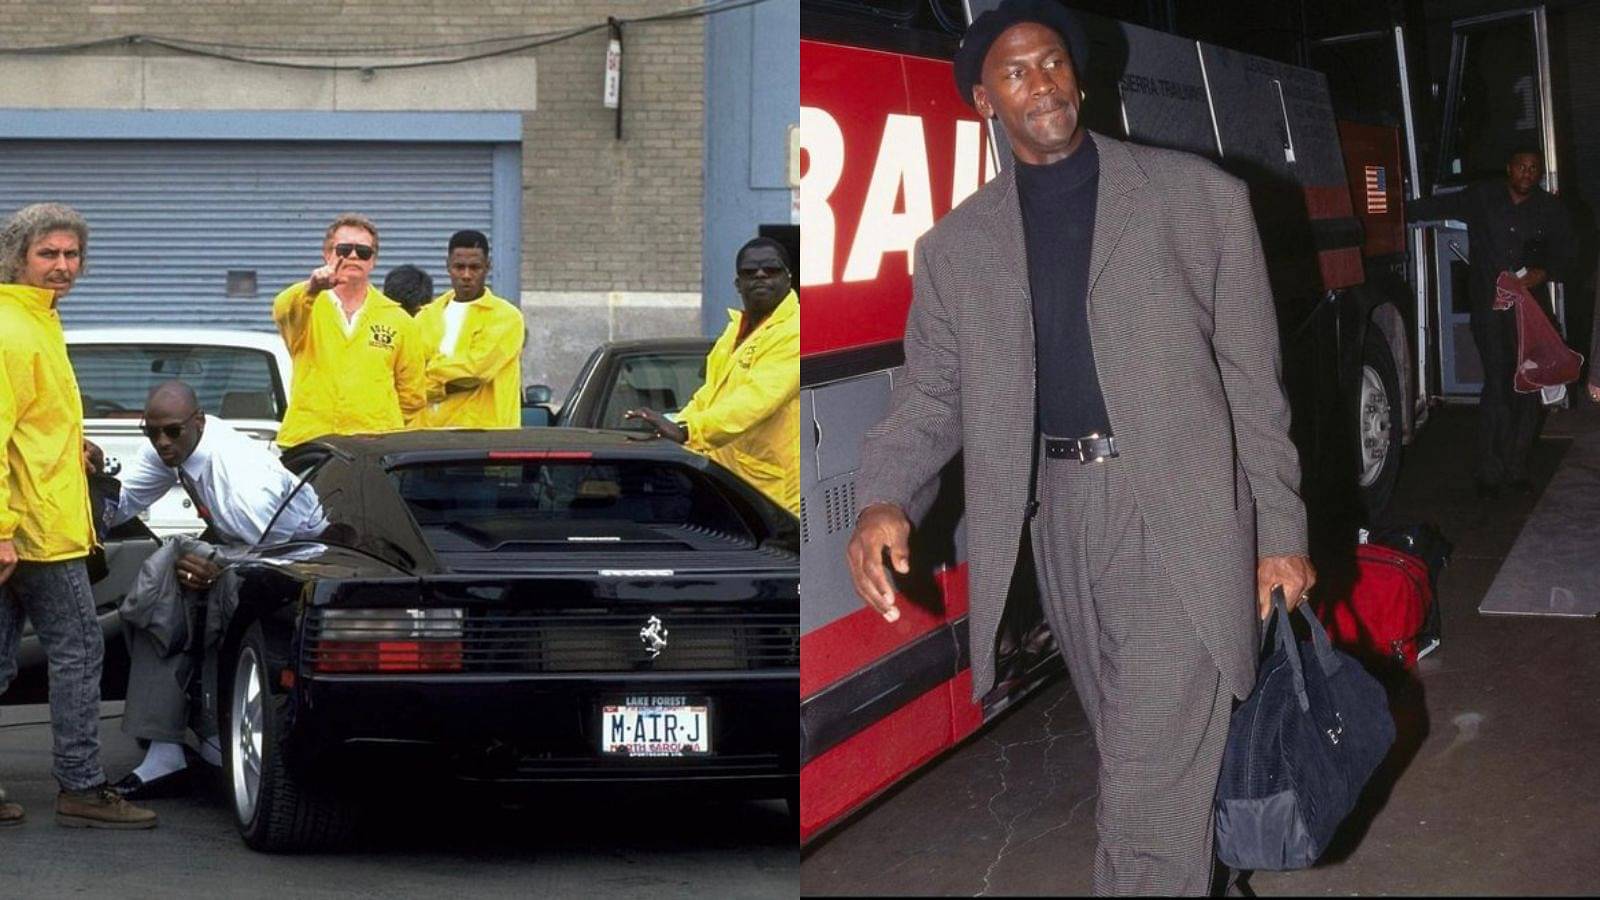 ‘Petty’ Michael Jordan once didn’t let Pistons star in his $250,000 Ferrari after Bulls suffered a loss in Chicago